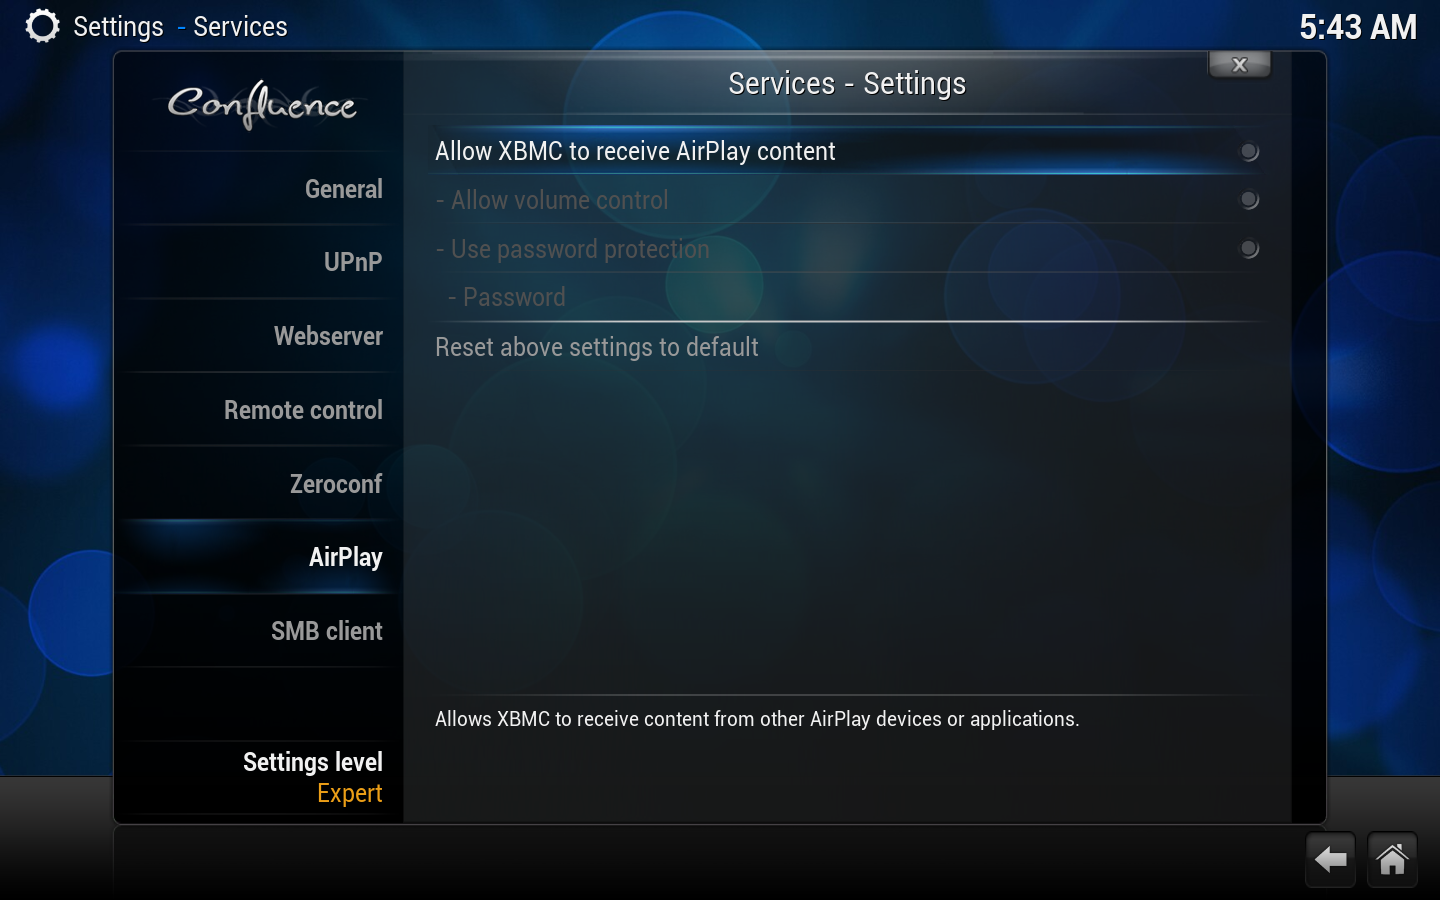 File:Settings.services.airplay.png